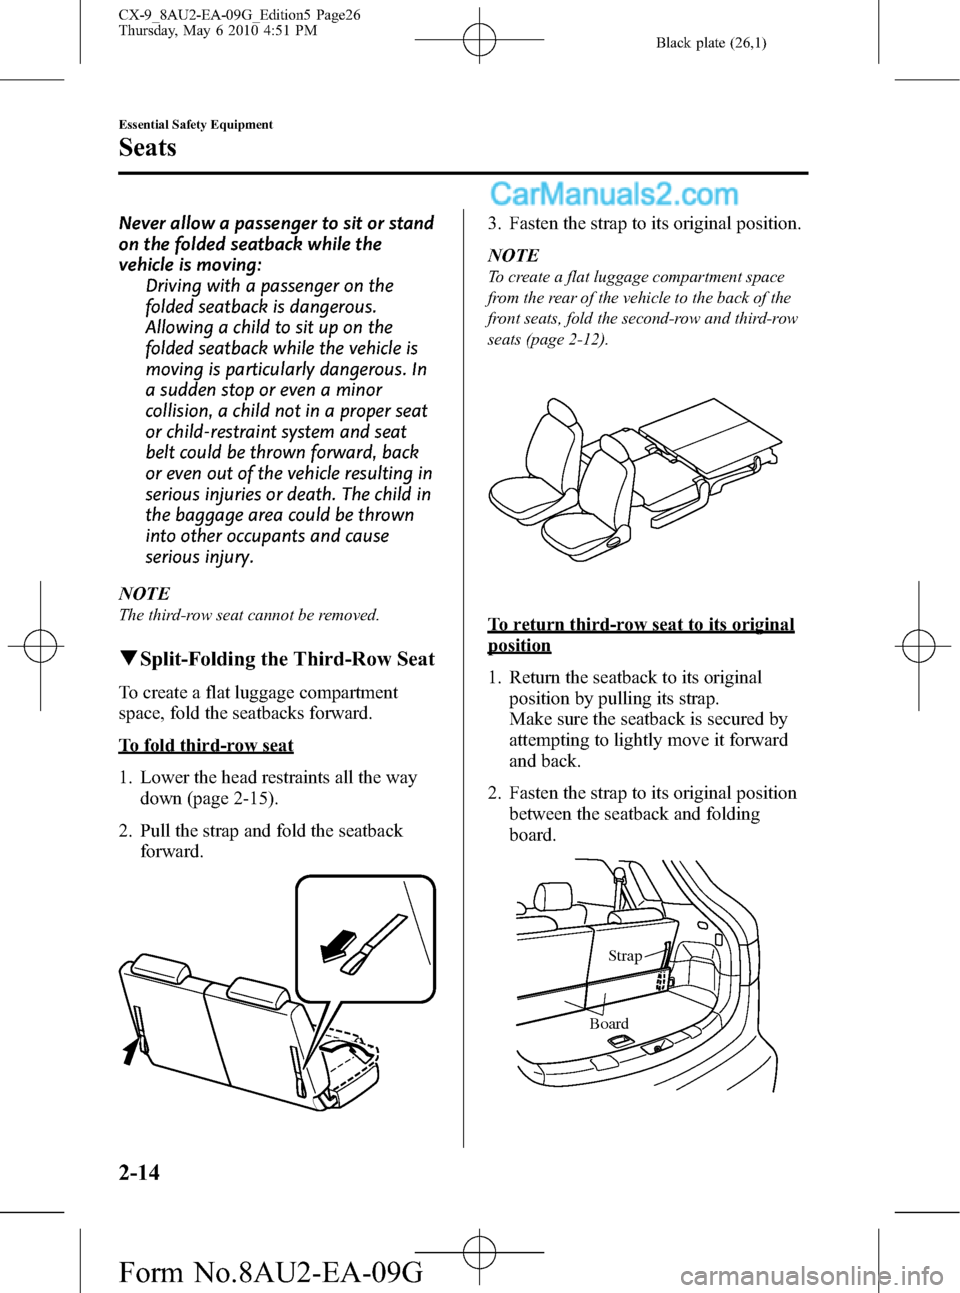 MAZDA MODEL CX-9 2010   (in English) Owners Manual Black plate (26,1)
Never allow a passenger to sit or stand
on the folded seatback while the
vehicle is moving:
Driving with a passenger on the
folded seatback is dangerous.
Allowing a child to sit up 